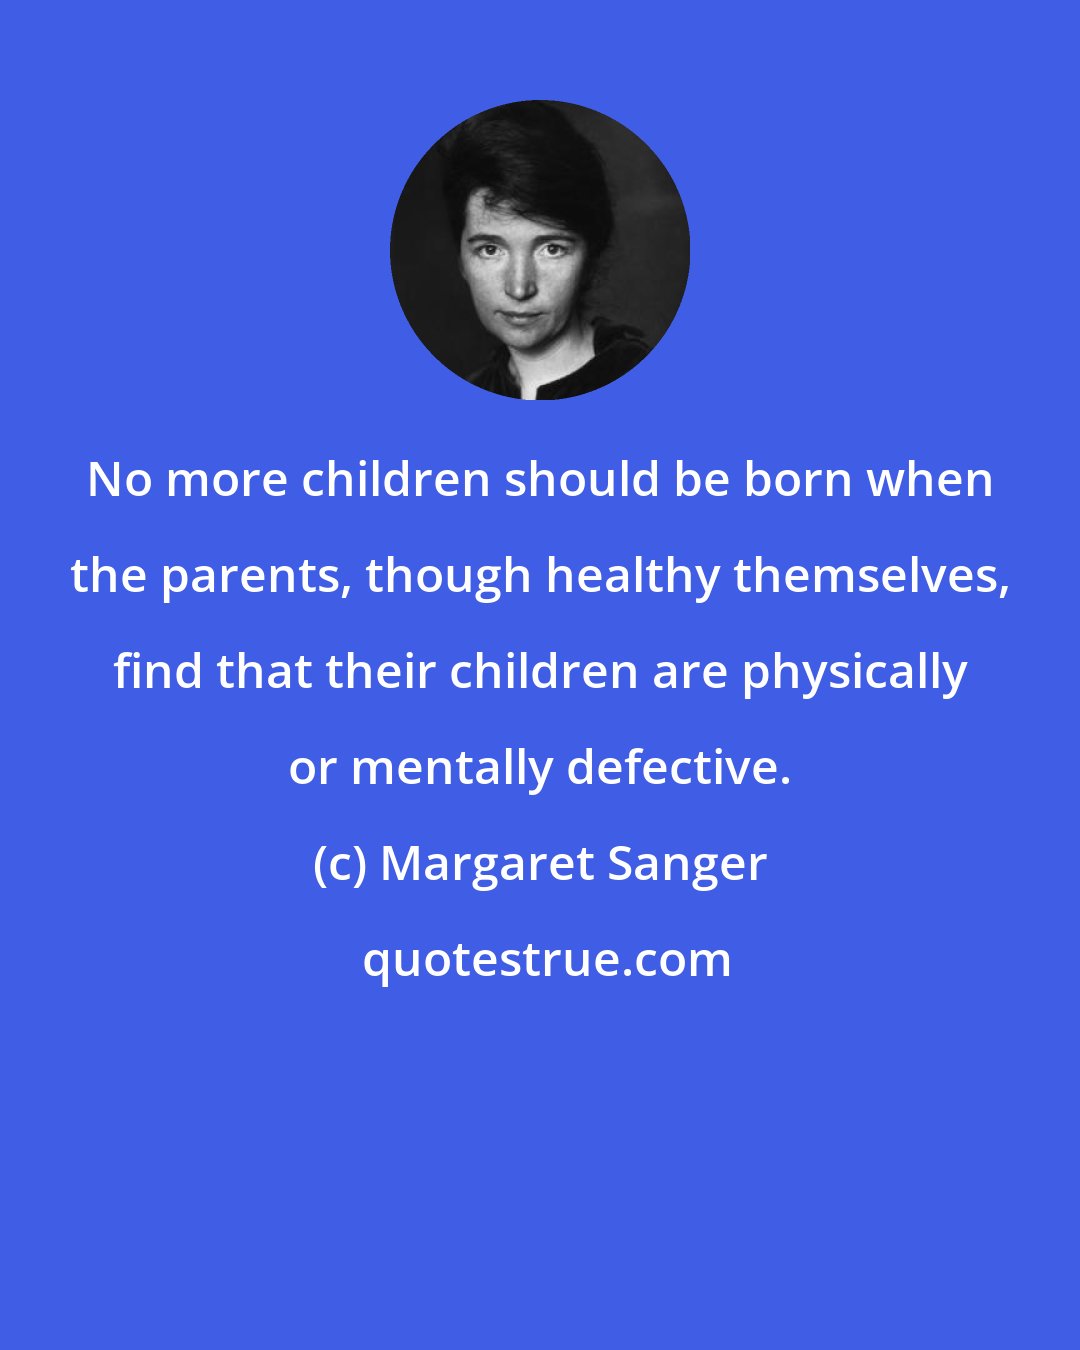 Margaret Sanger: No more children should be born when the parents, though healthy themselves, find that their children are physically or mentally defective.